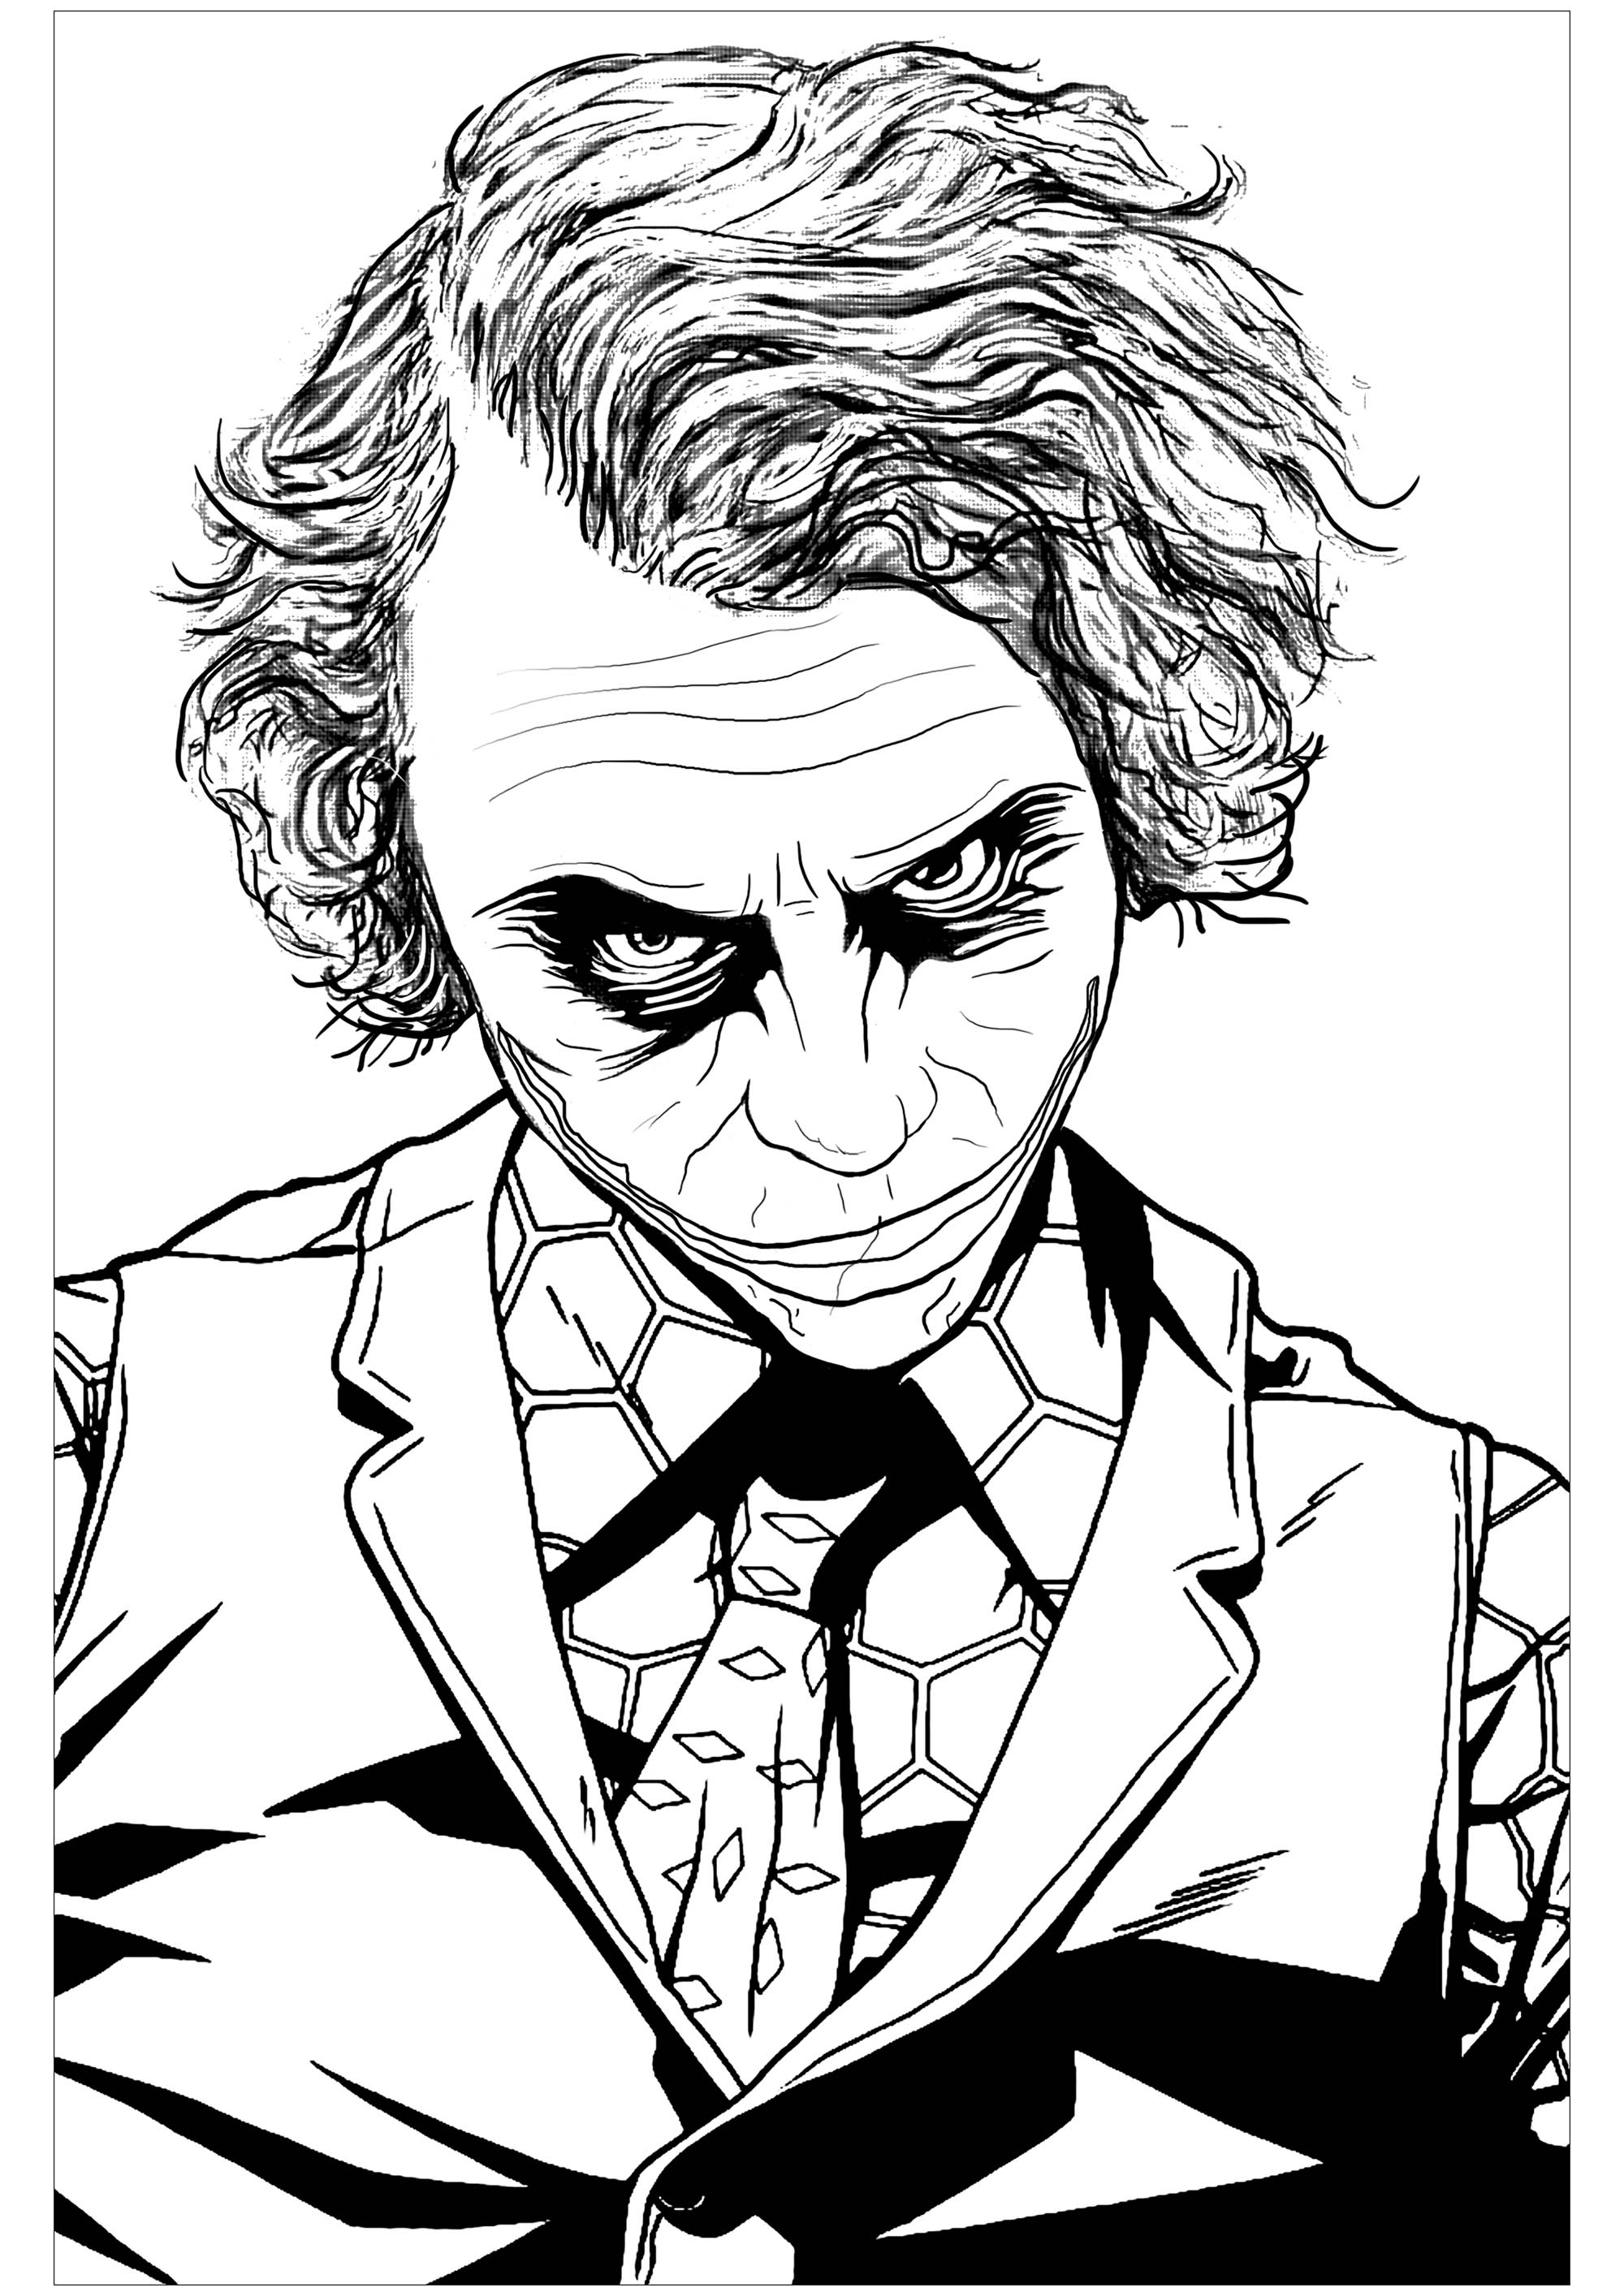 The Joker Heath Ledger Movies Adult Coloring Pages